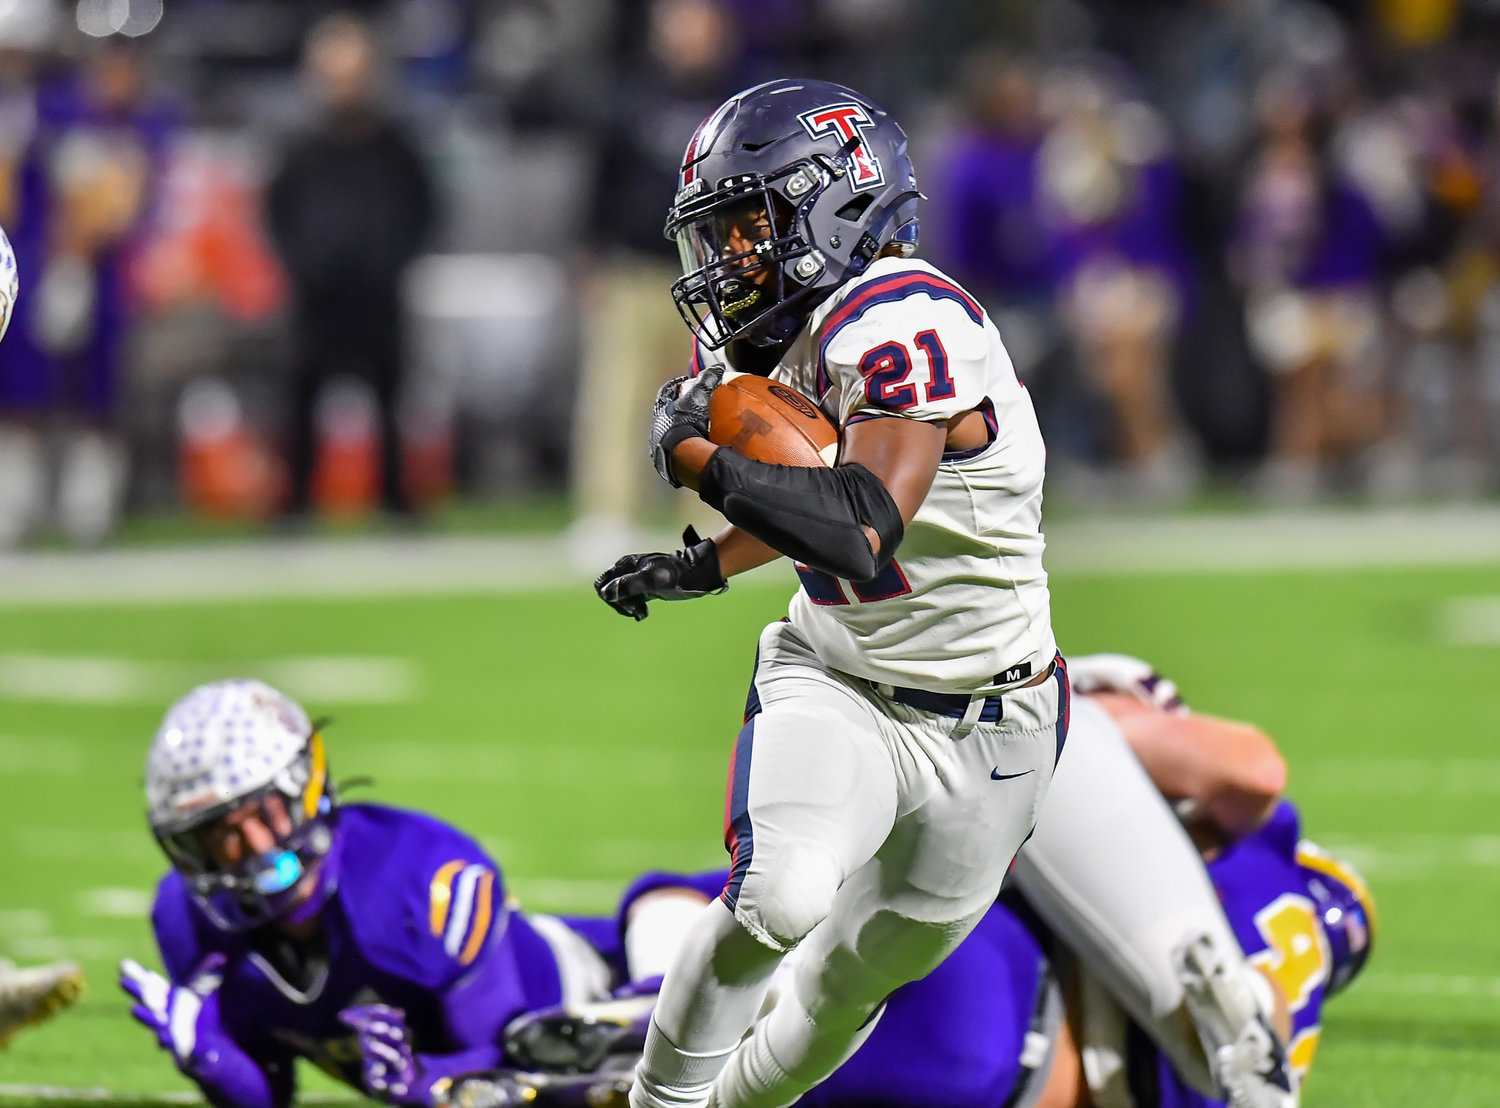 Houston Tx. Nov 19, 2021: Tompkins #21 Caleb Blocker rushes in for a TD during the first half of the UIL area playoff game between Tompkins and Jersey Village at Pridgeon Stadium in Houston. (Photo by Mark Goodman / Katy Times)